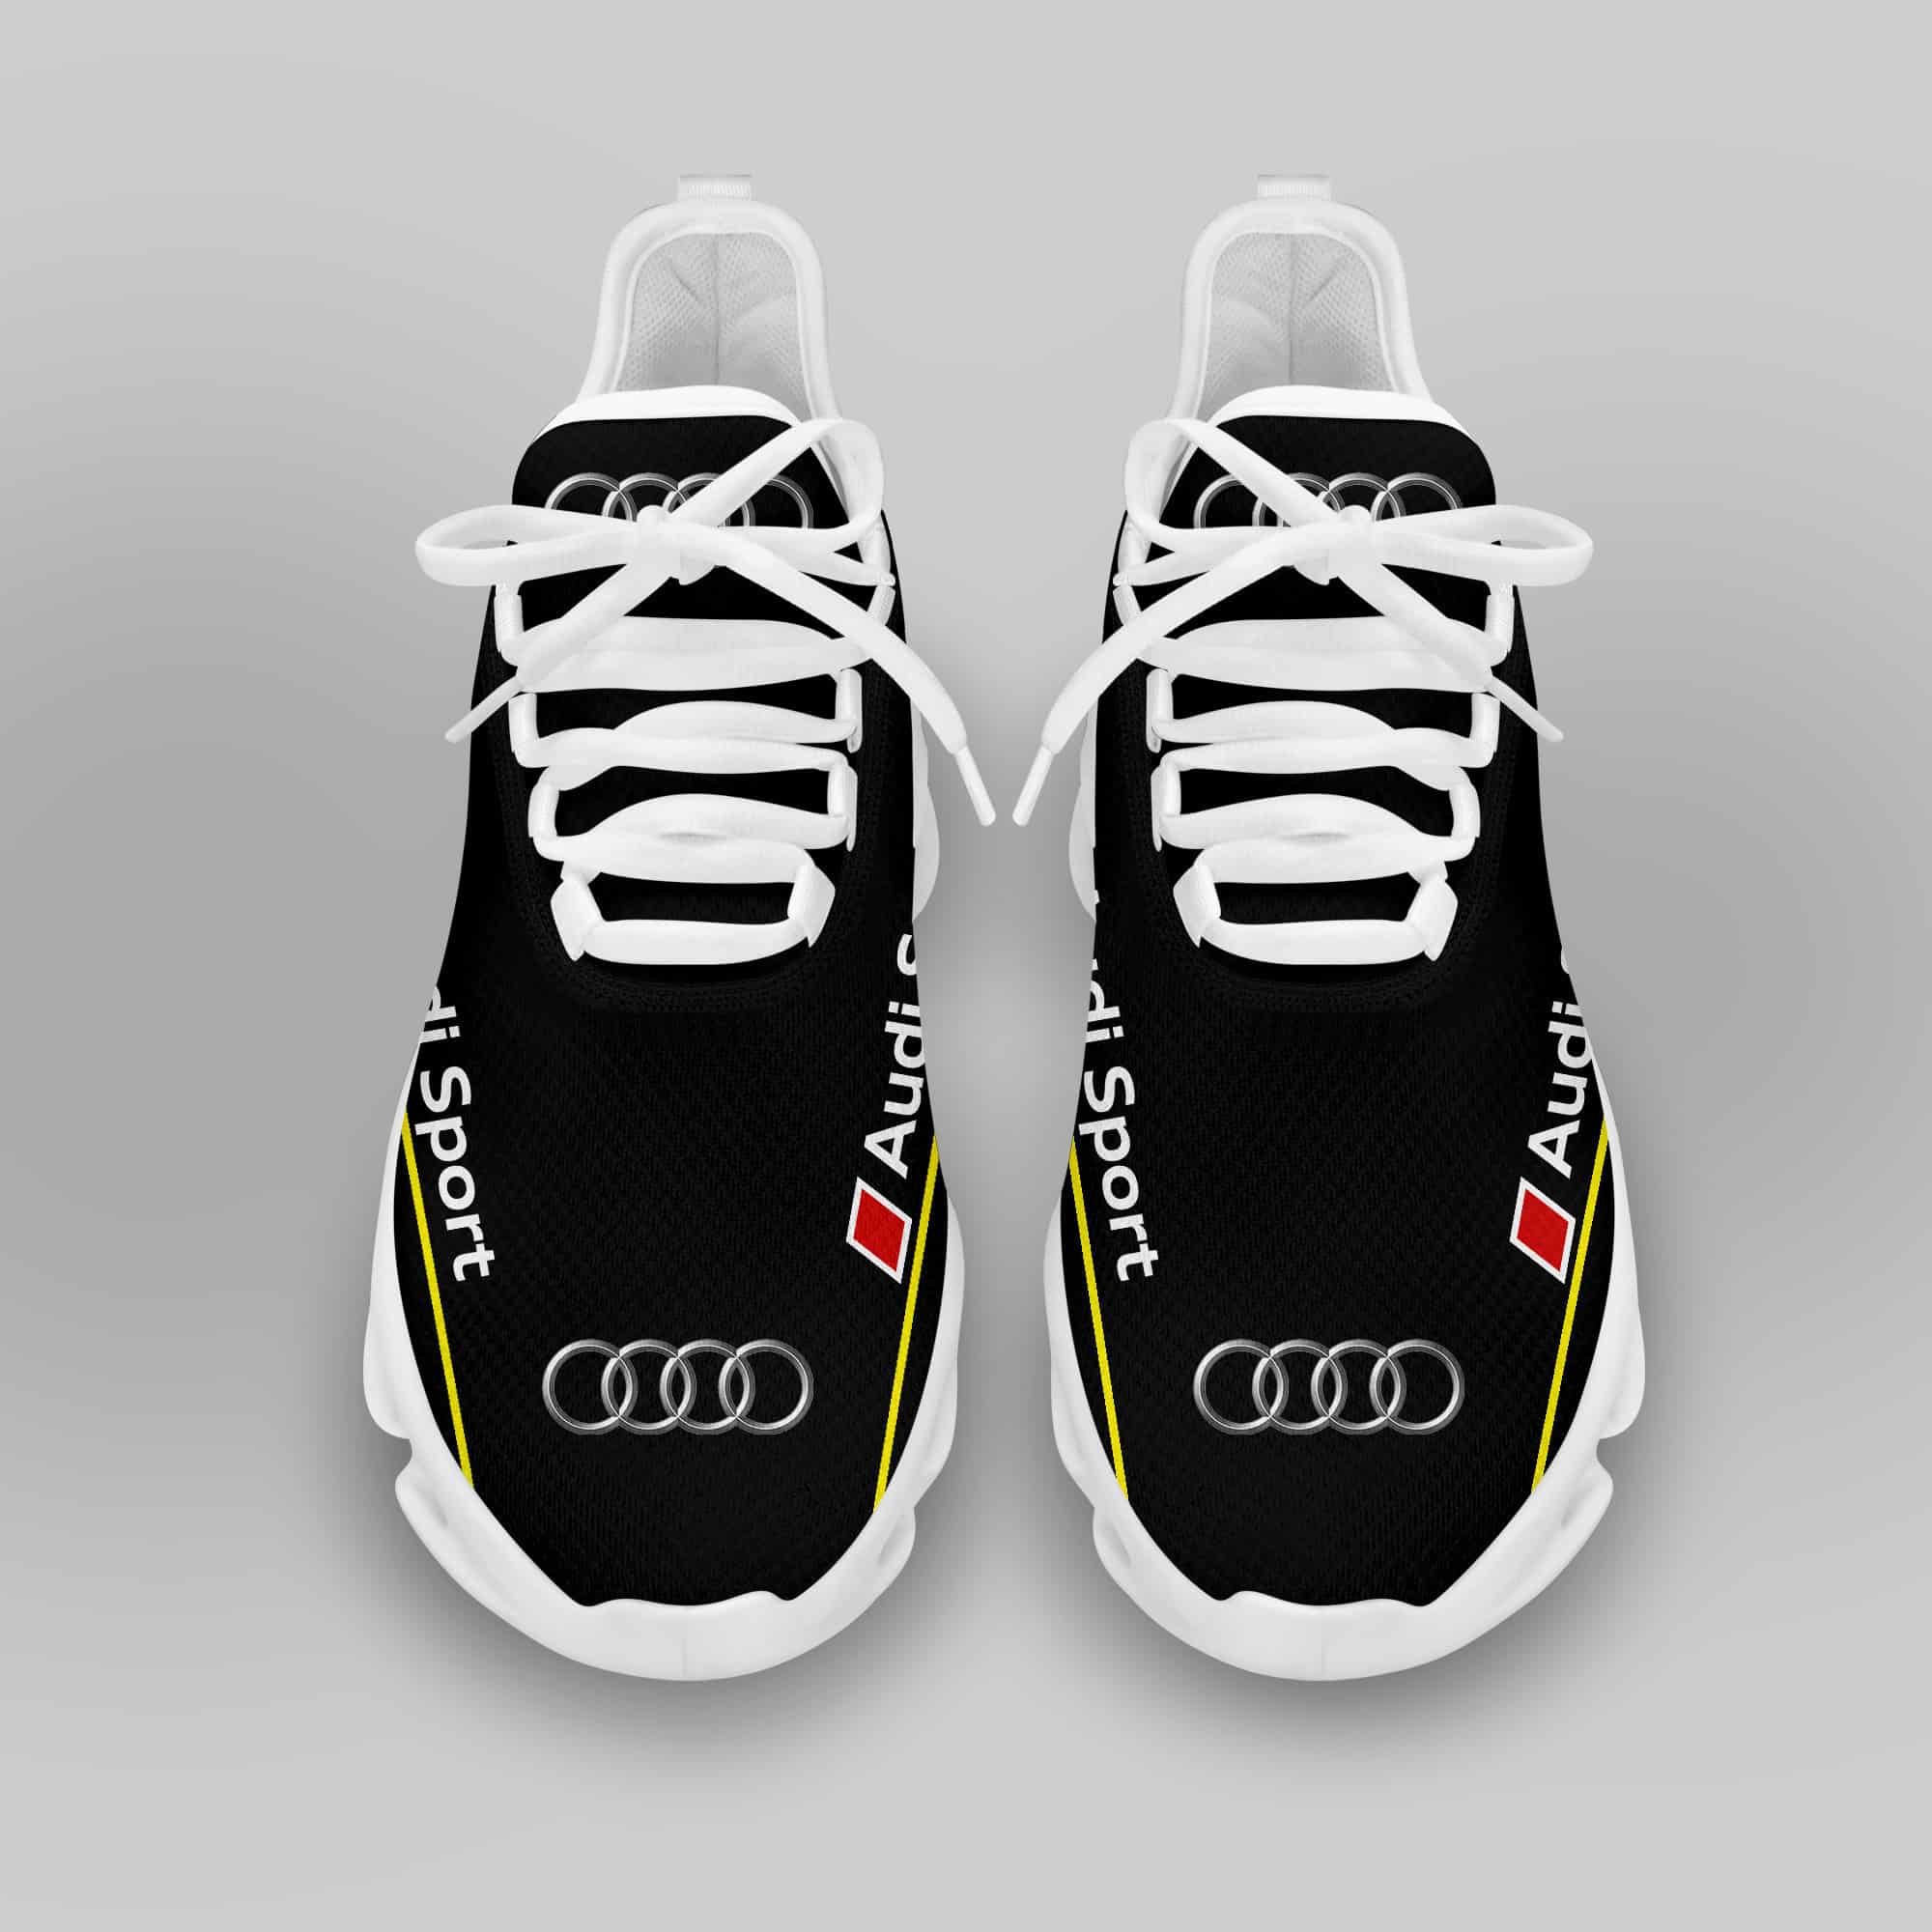 Audi Sport Running Shoes Max Soul Shoes Sneakers Ver 39 3